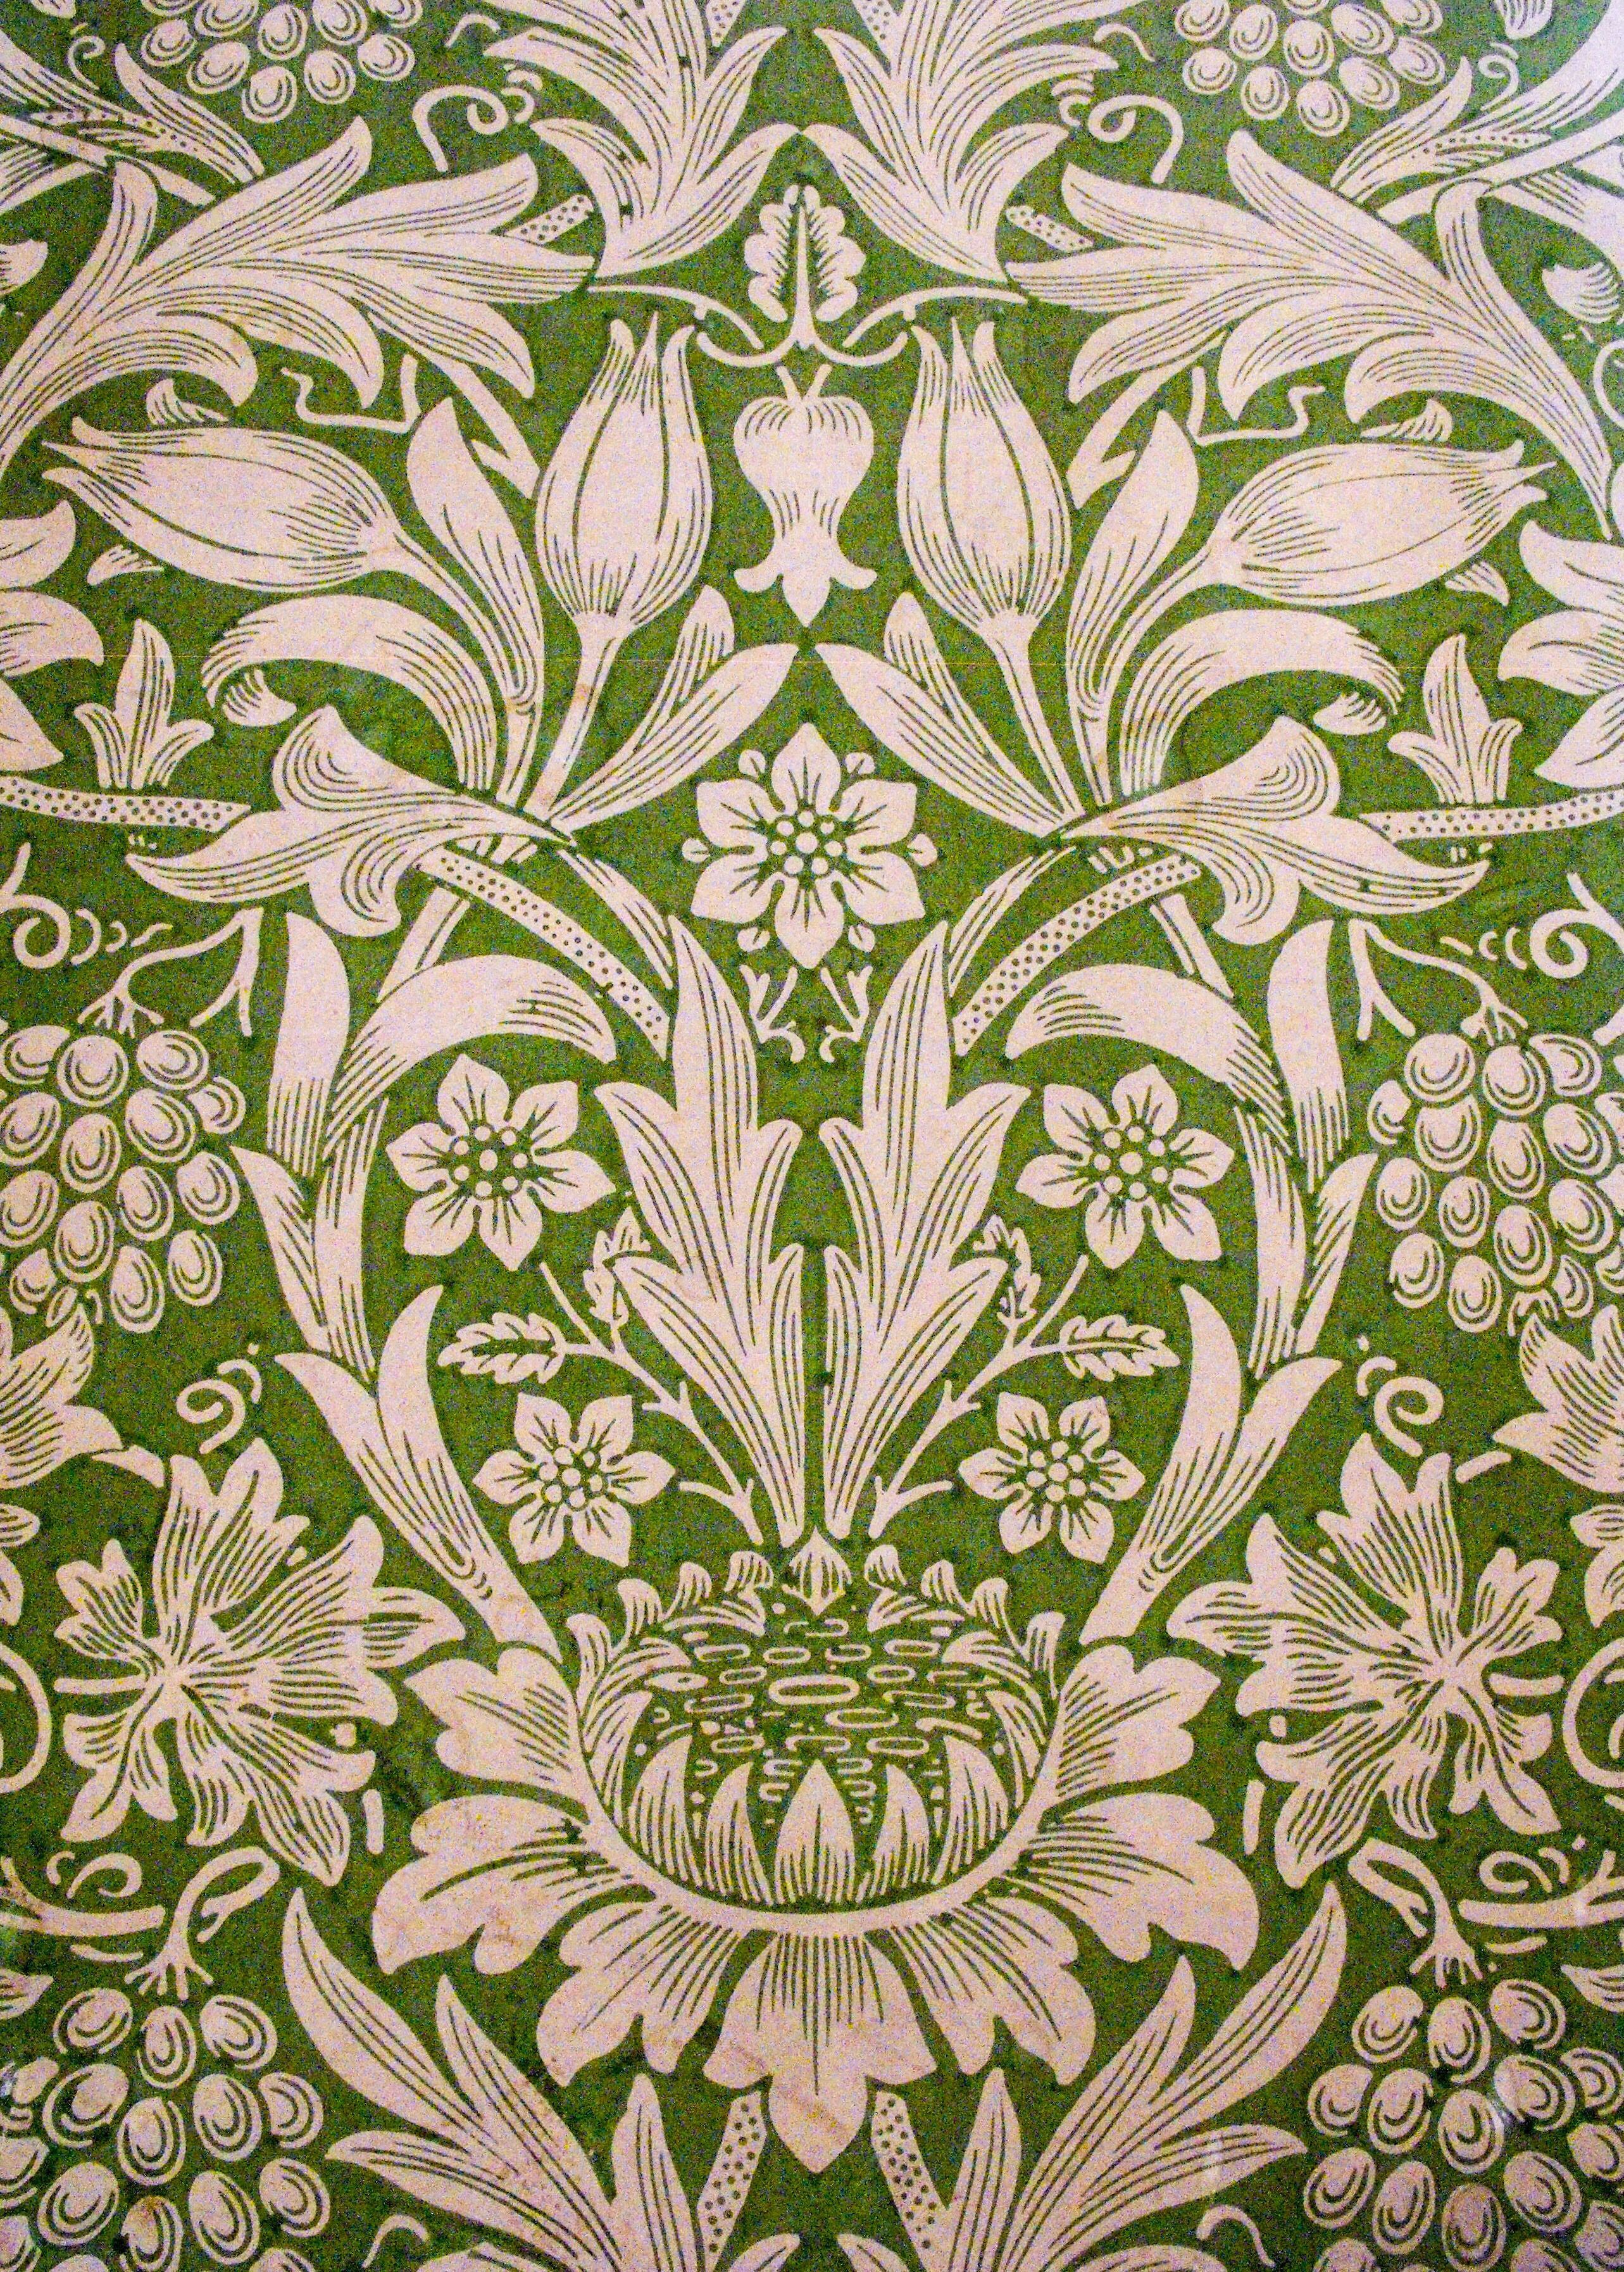 William Morris arts and crafts movement. William morris wallpaper, William morris art, William morris patterns